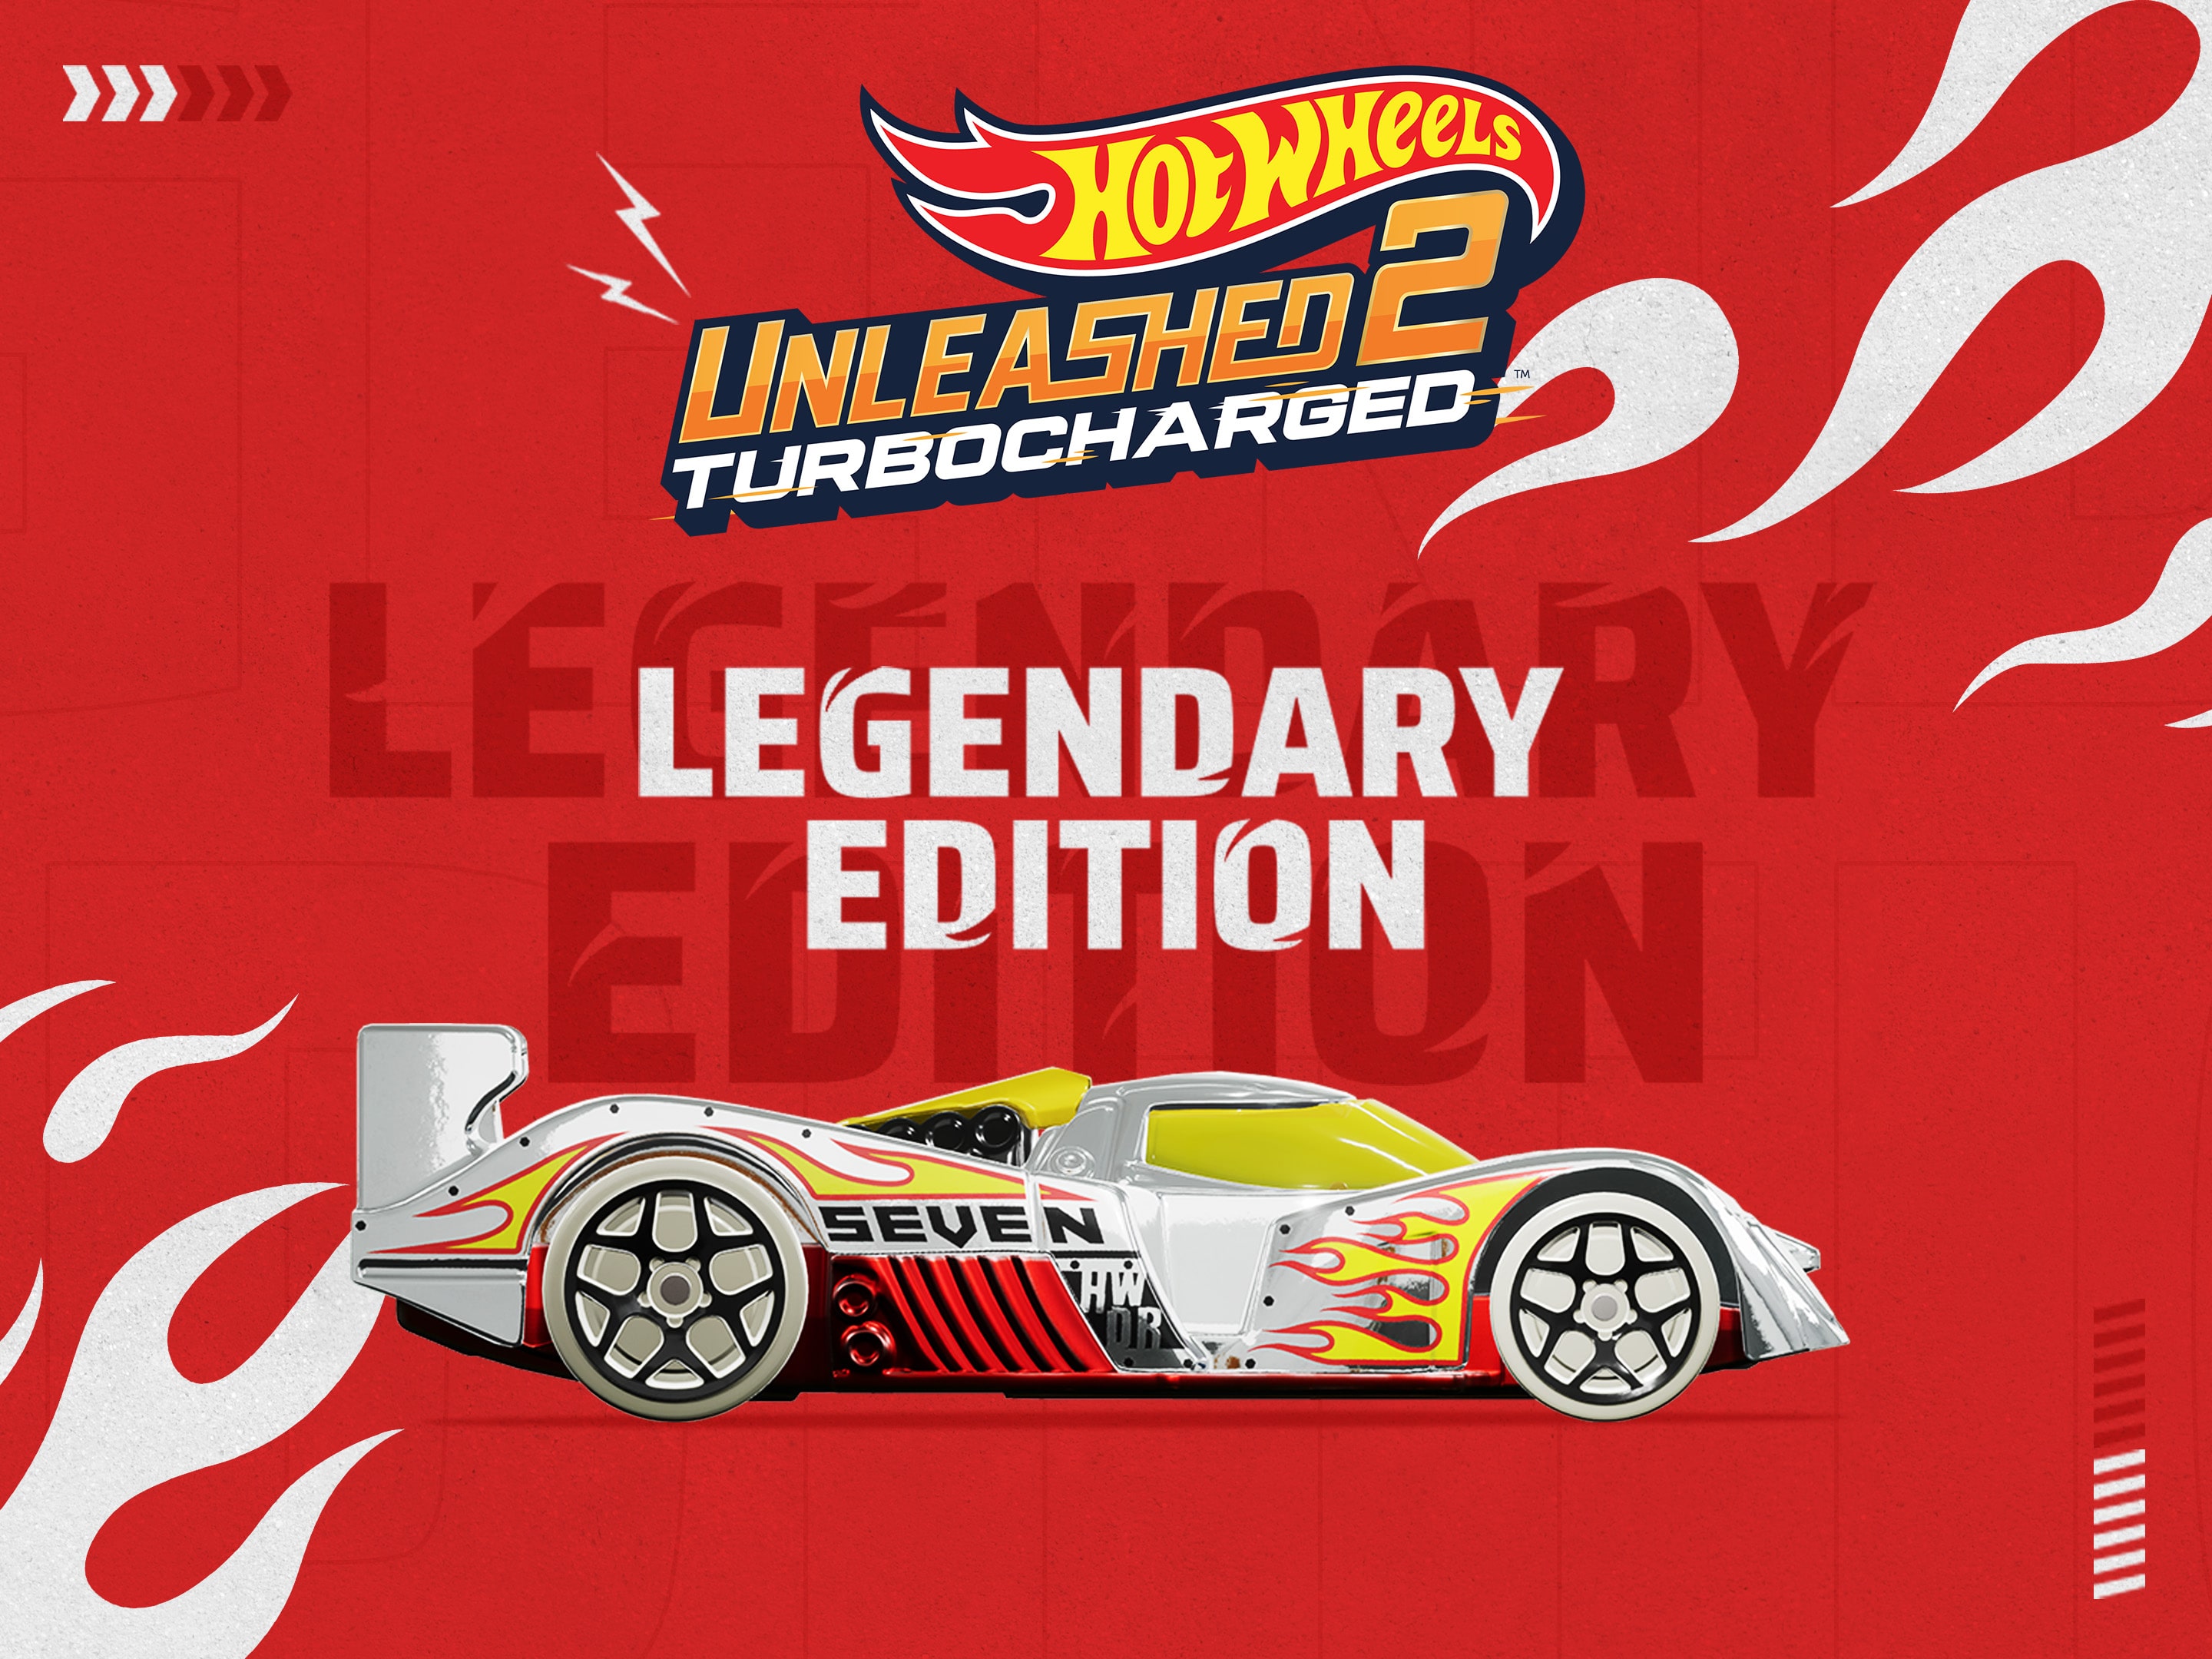 & UNLEASHED™ Legendary Edition - 2 PS4 PS5 Turbocharged WHEELS HOT -